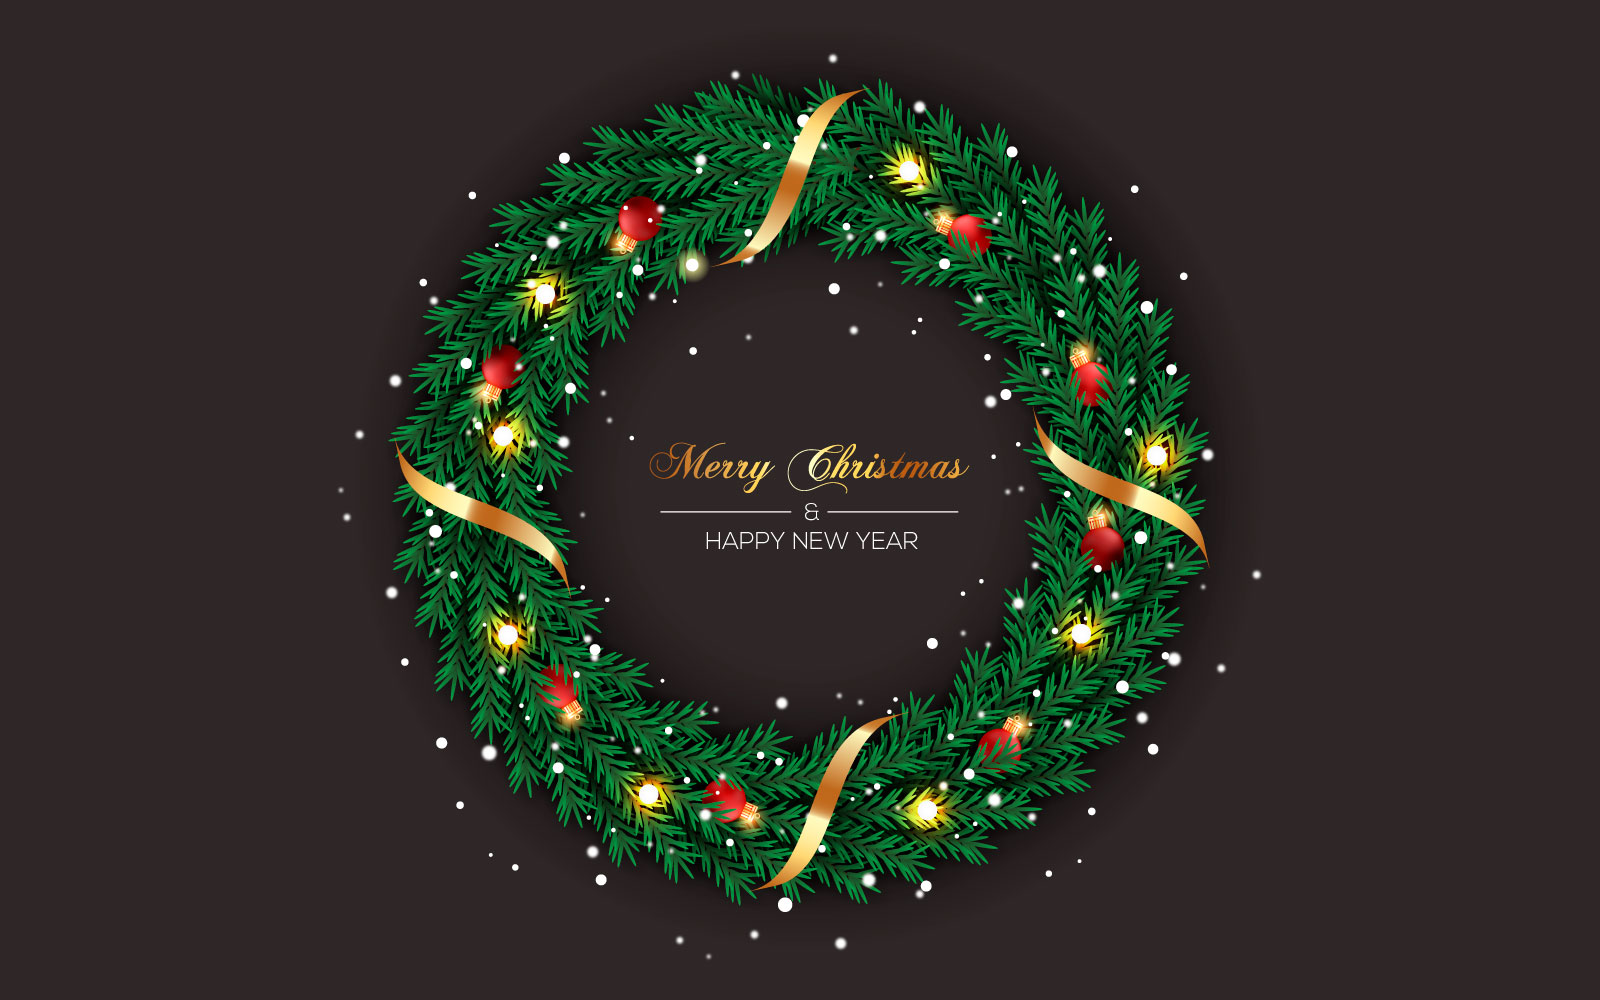 Christmas wreath with decorations on color background with pine branch and stars